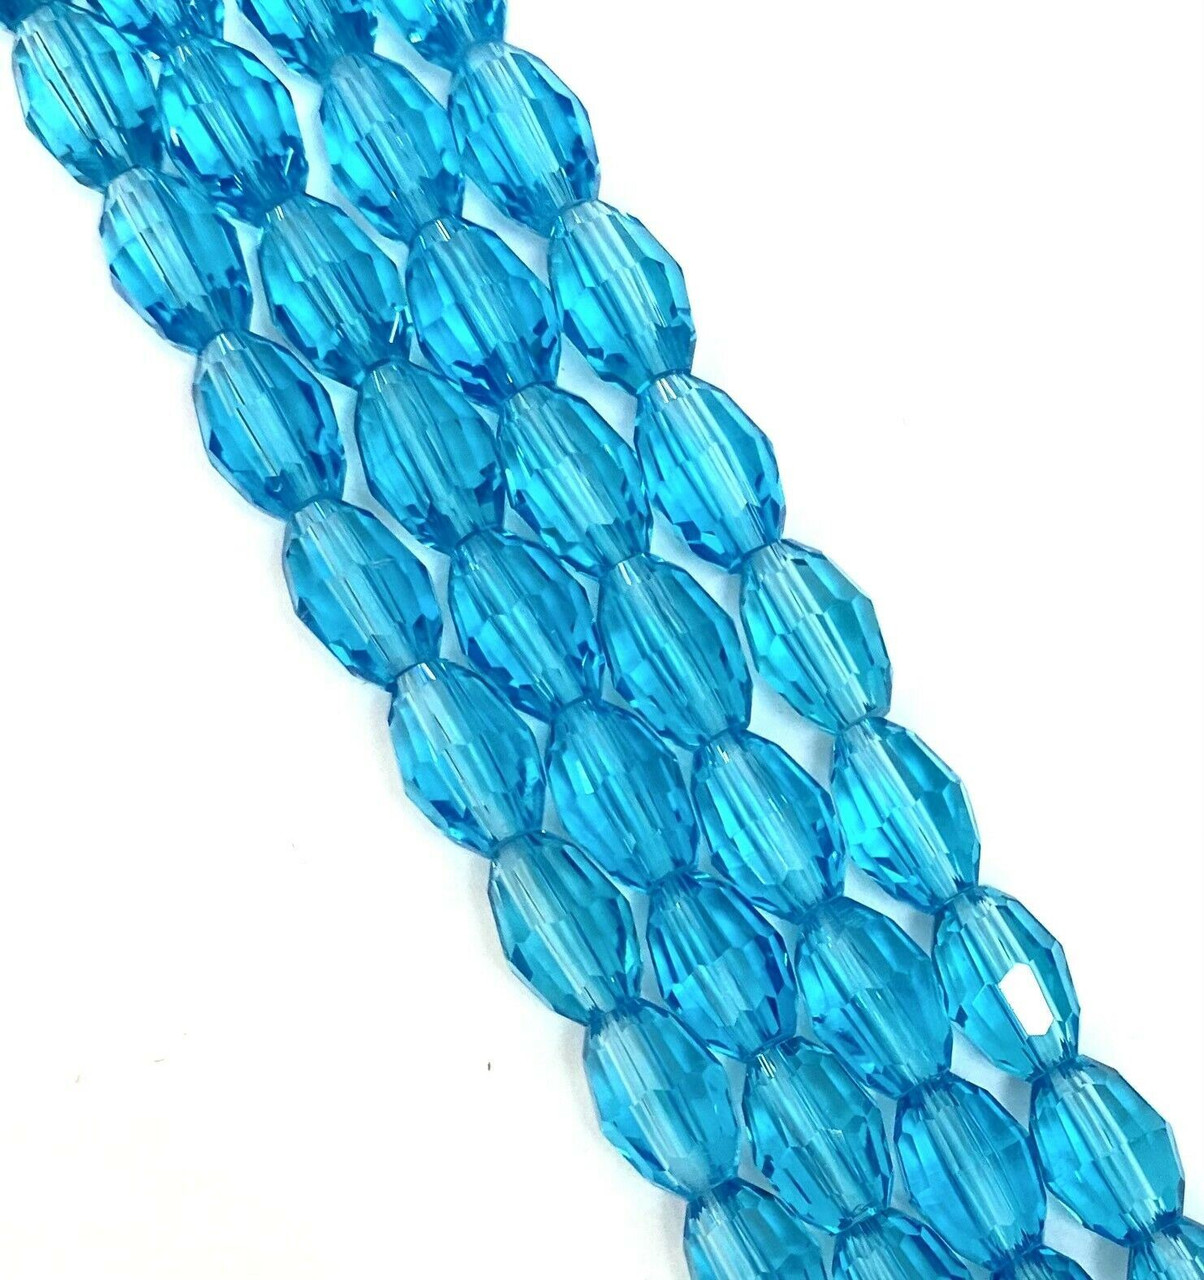 Strand of faceted rice glass beads - approx 6x4mm, TURQUOISE, approx 72 beads